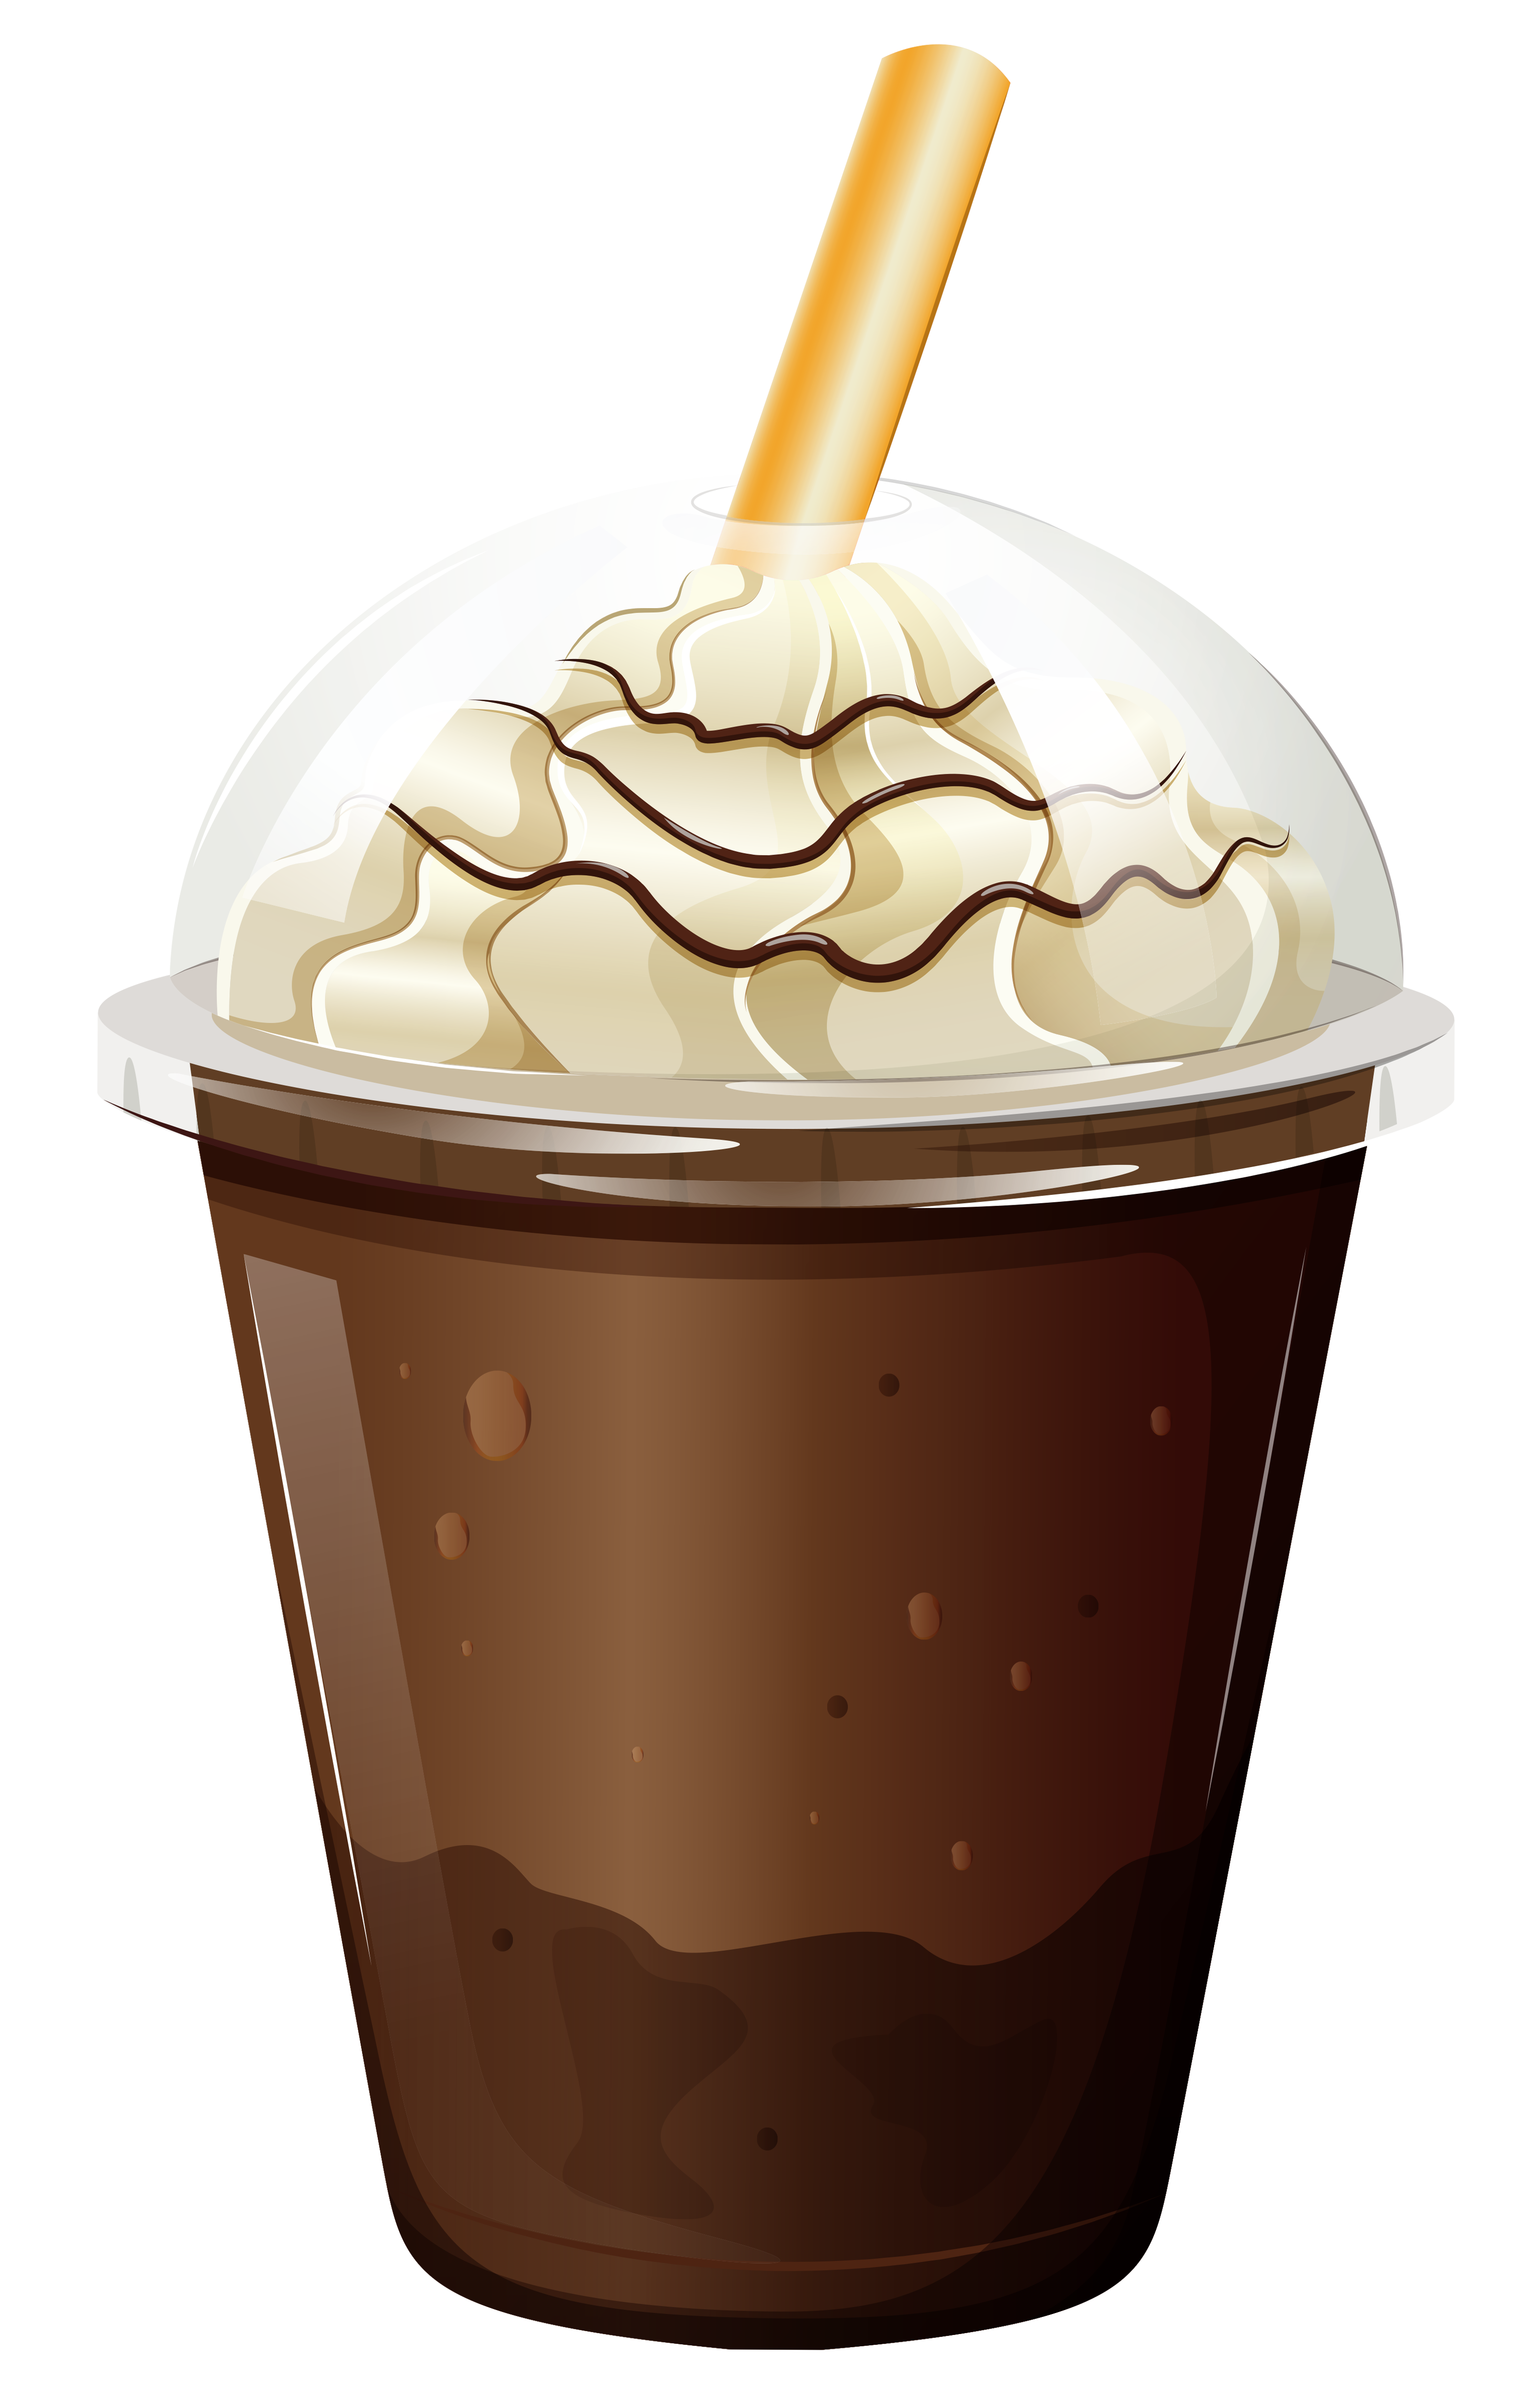 Sundae clipart whipped cream. Coffee cup with png